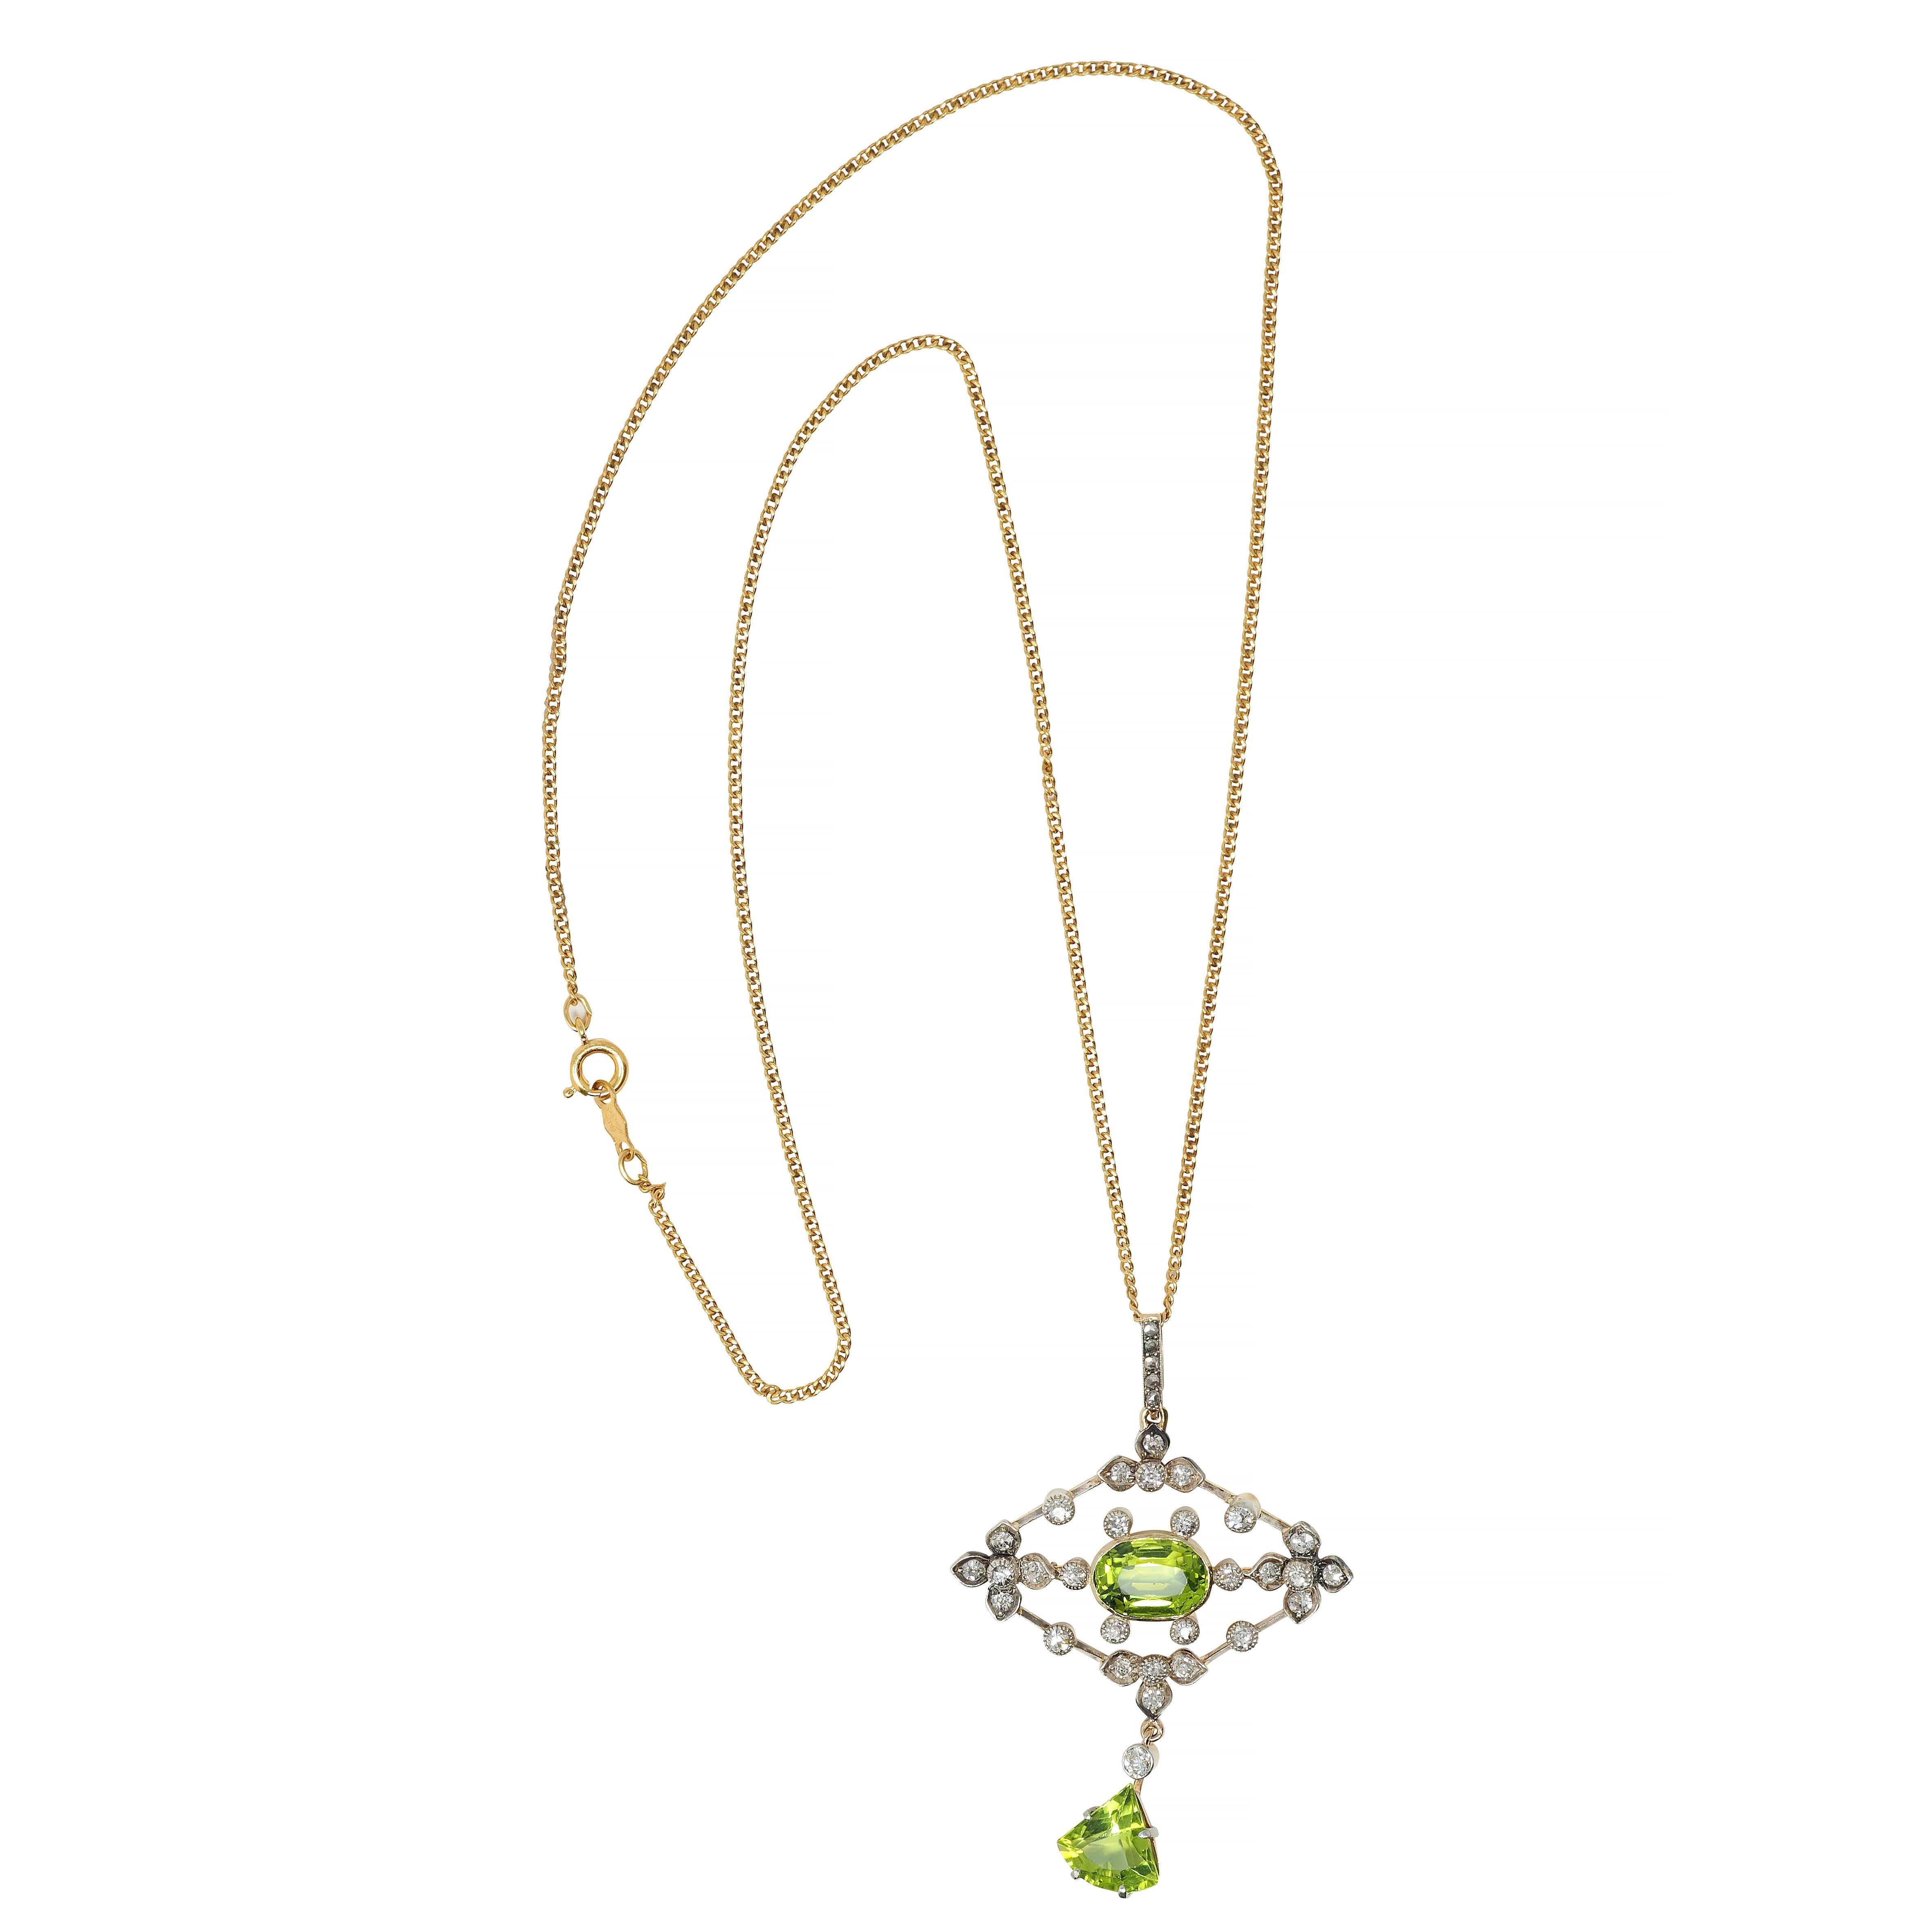 Designed as a 1.5 mm curb link chain suspending a bale and pierced trapezoid-shaped pendant 
With highly rendered silver-topped foliate motif and centering an oval cut peridot 
Suspending an additional shield cut peridot articulating as a drop -